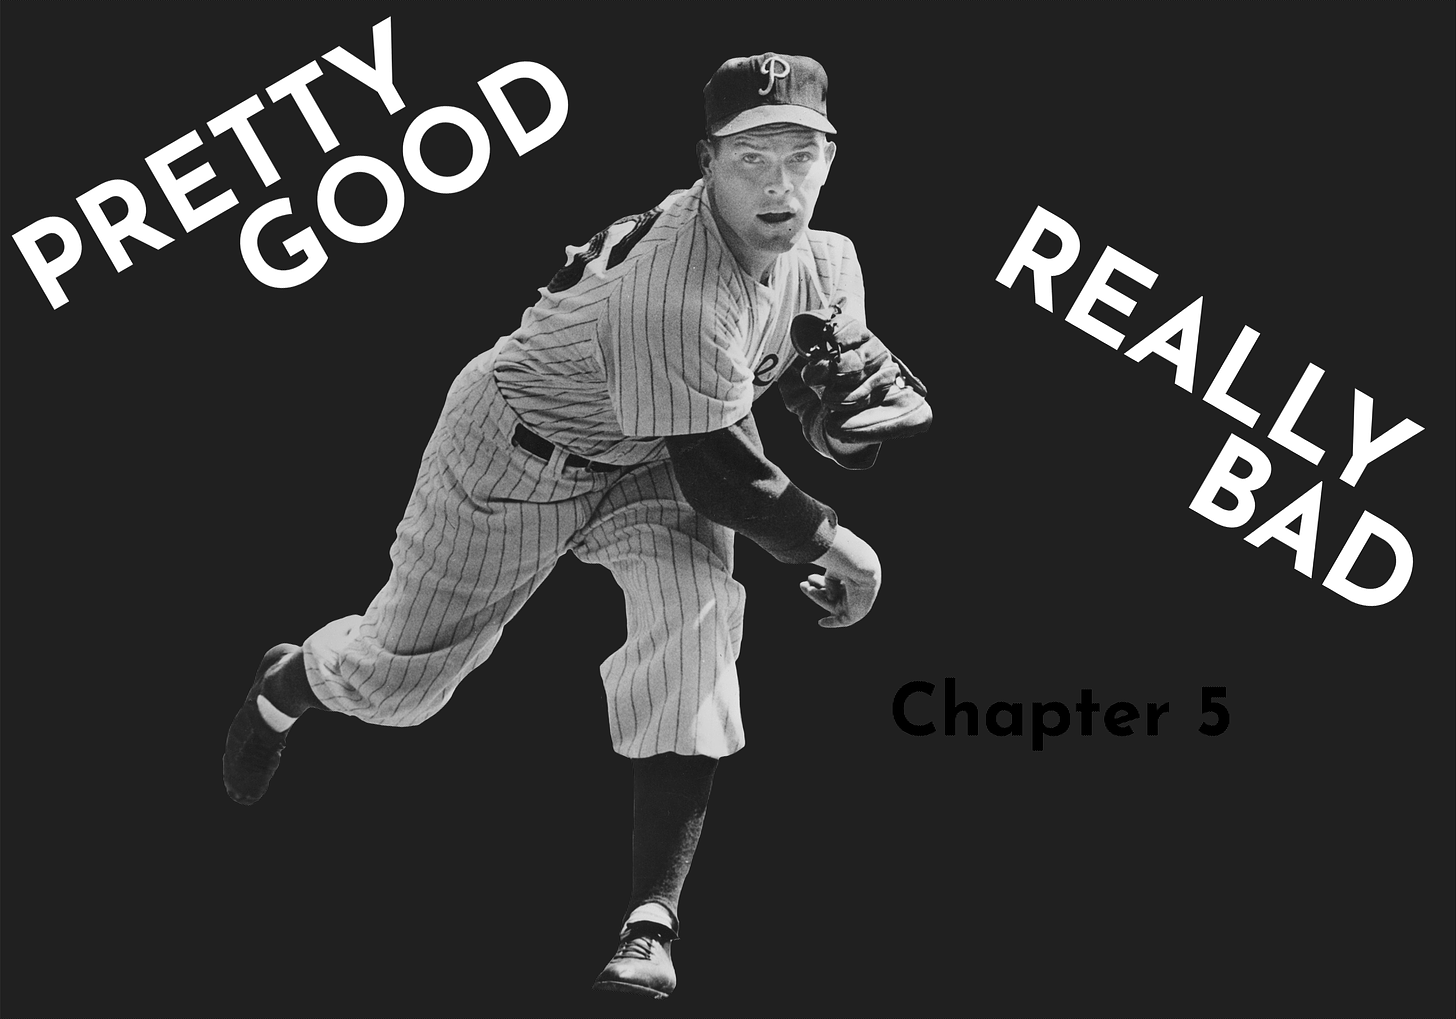 Pretty Good / Really Bad Chapter 5 title card